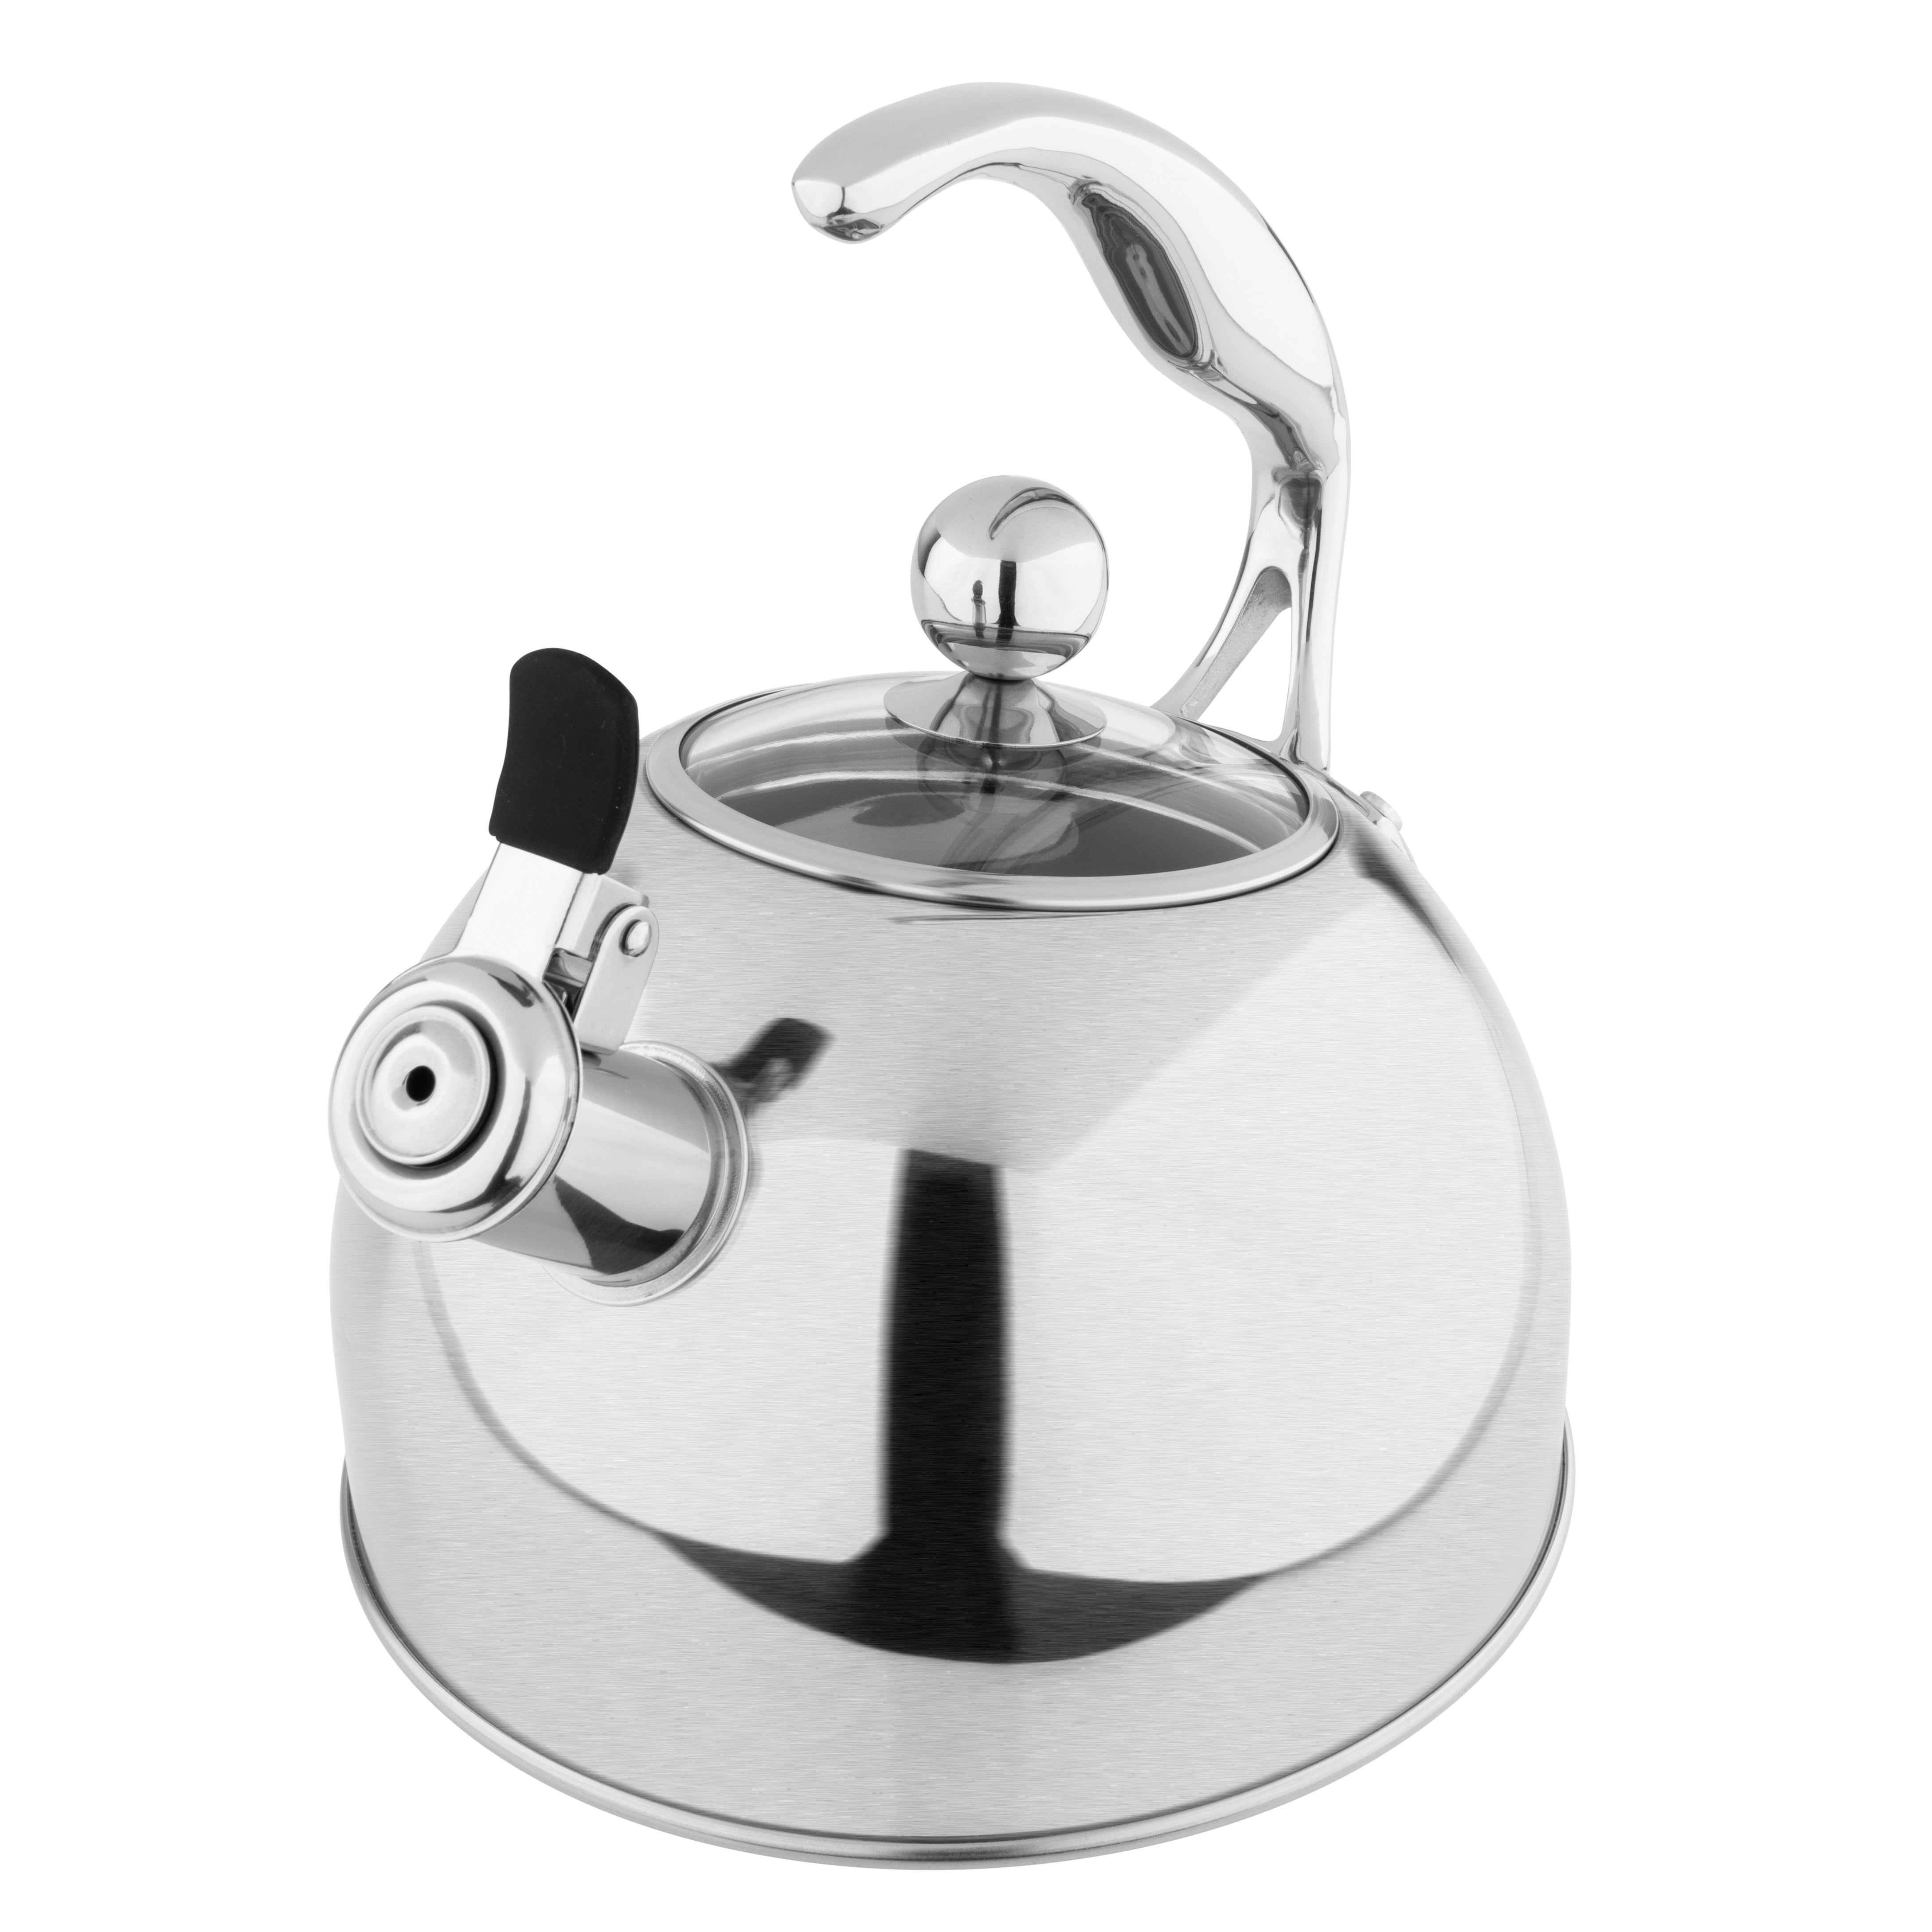 Precision Trading PTK5156 Stainless Steel Electric Tea Kettle